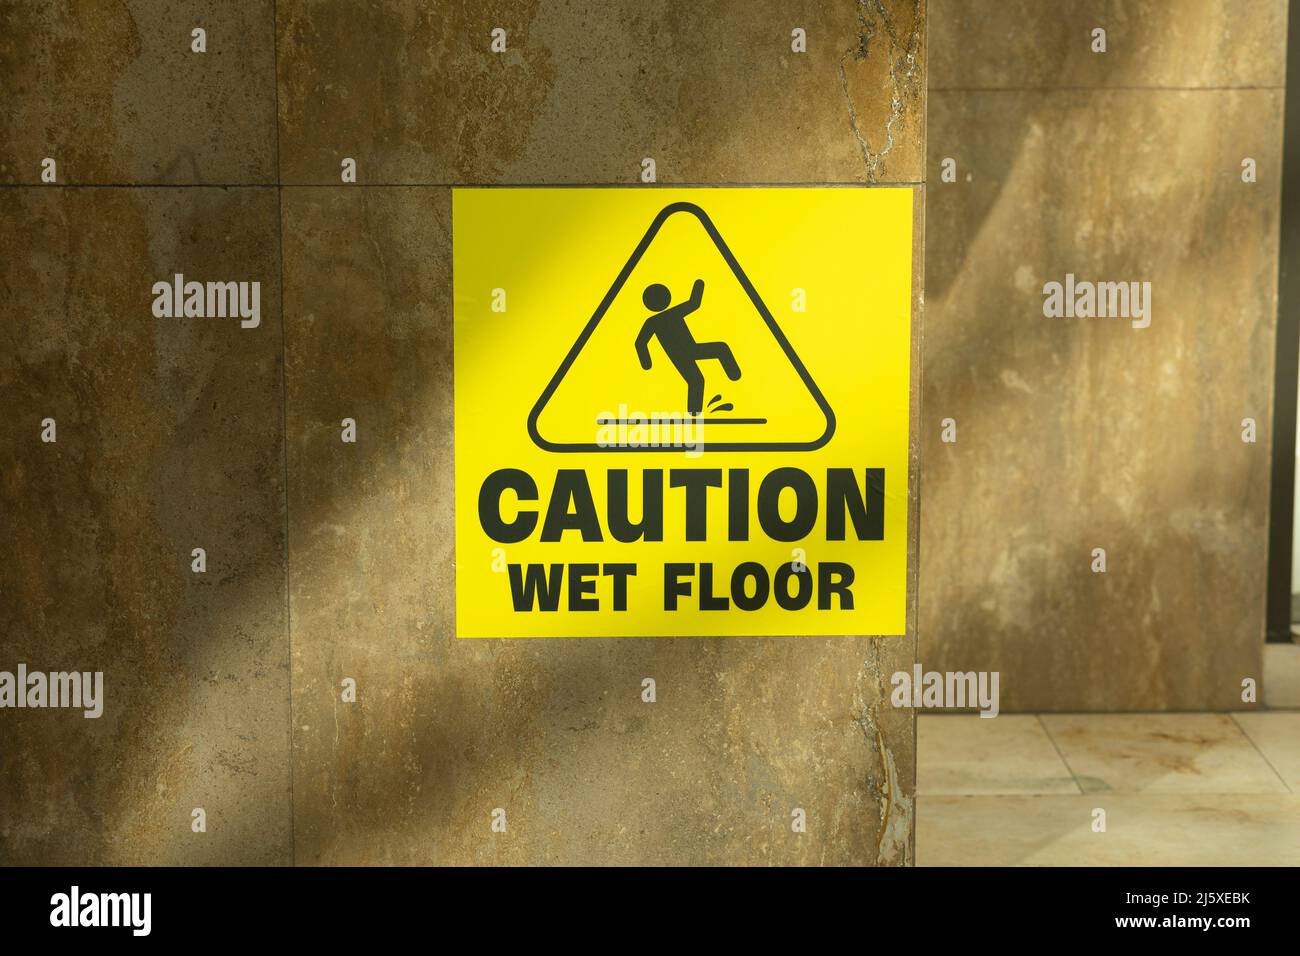 caution wet floor sign in yellow colour Stock Photo